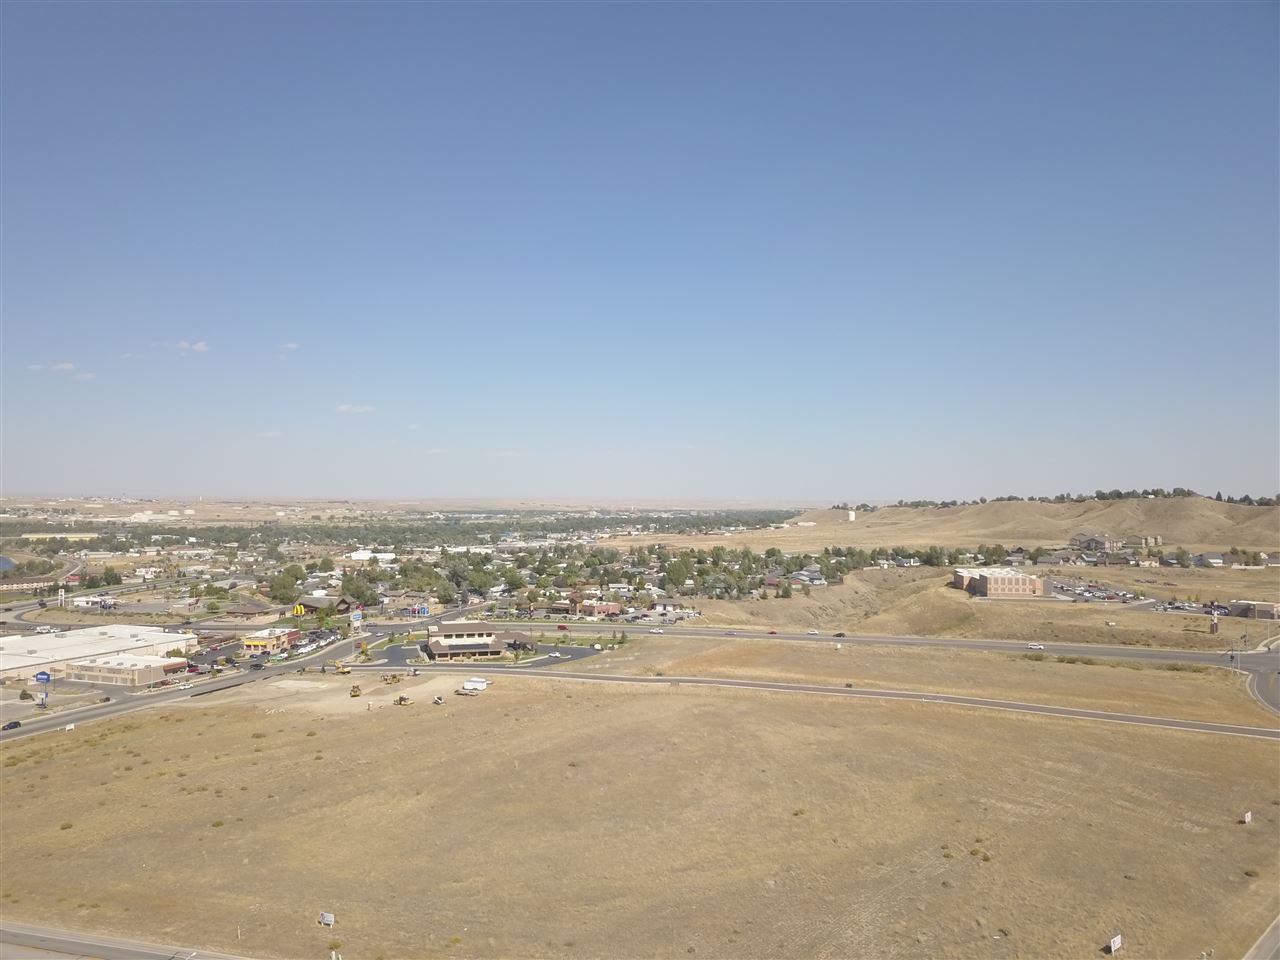 BrokerOne Real Estate is pleased to offer for sale, fully-developed commercial lots adjacent to a Walmart Supercenter in the Mountain Plaza shopping district located in western Casper, WY 82604. Mountain Plaza, a 50-acre retail and mixed use development,  features ±25 acres available.  Existing pads range in size from 25,635 sf to 140,491 sf and parcels can be combined up to 11 acres.